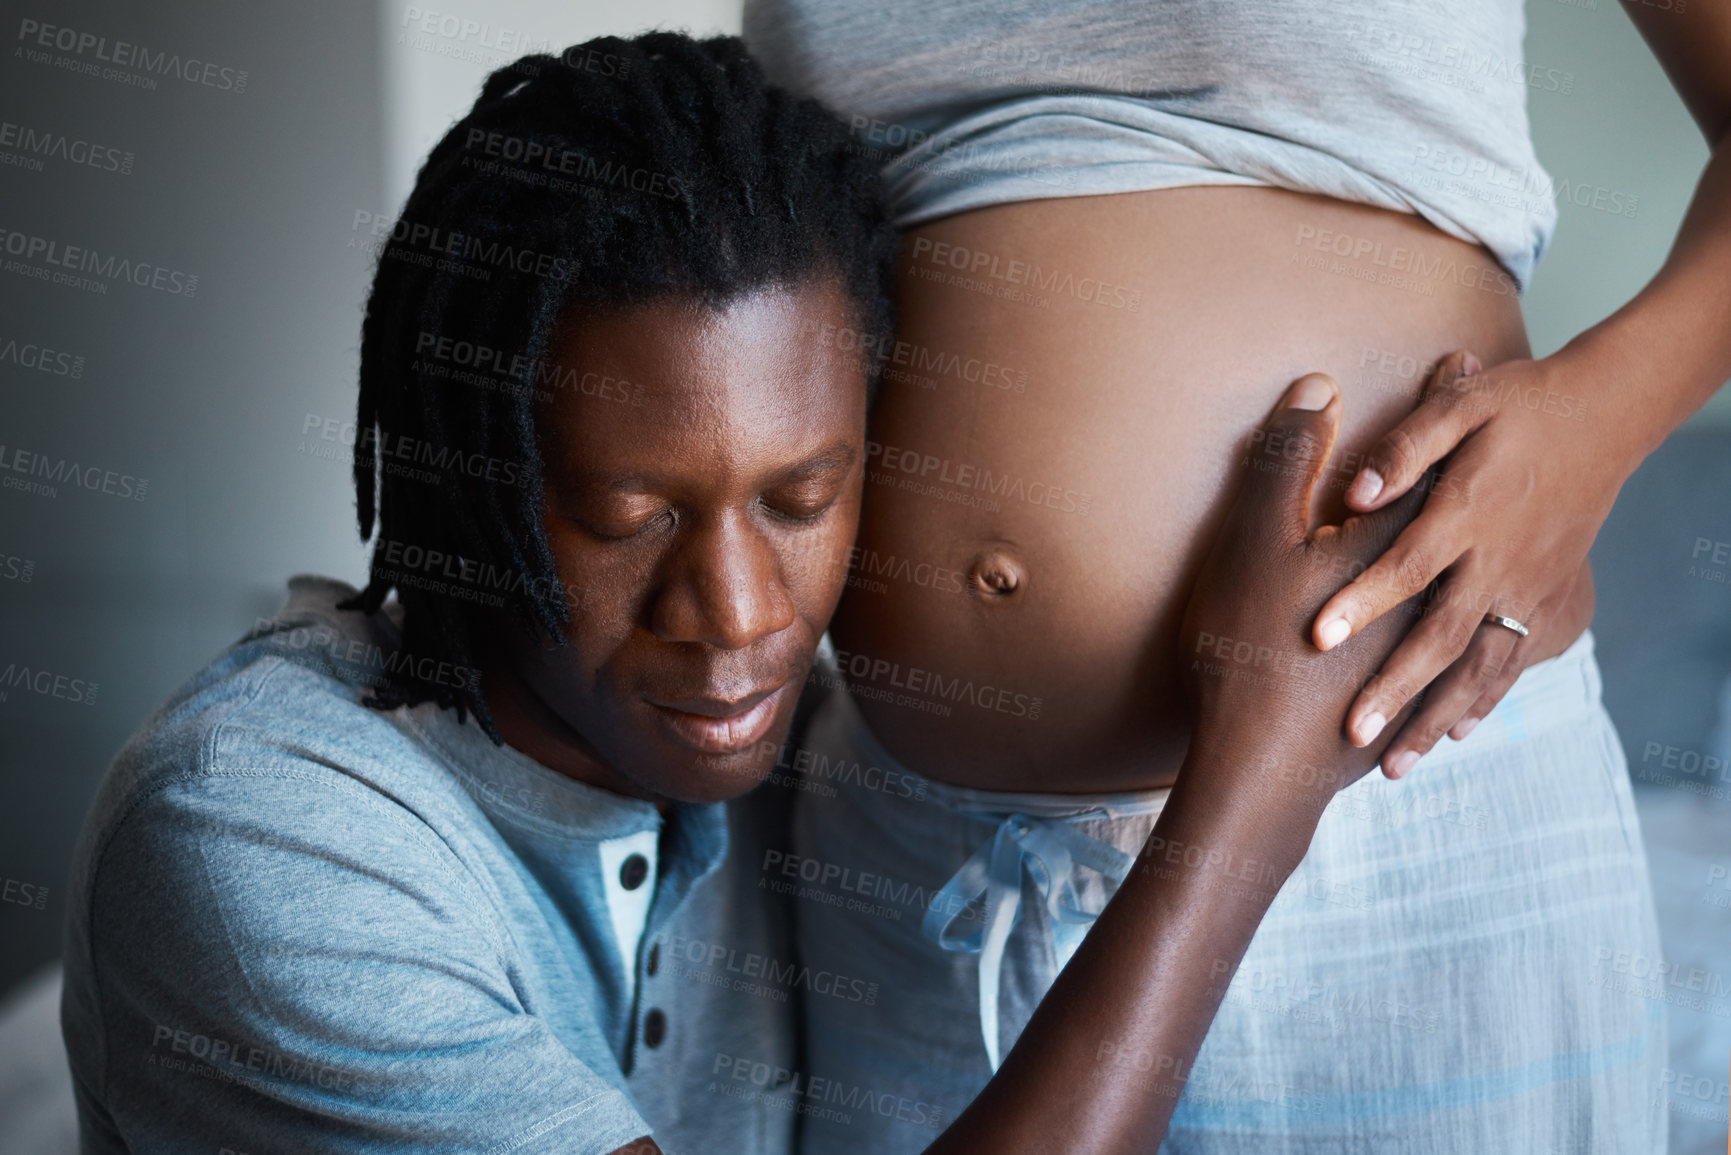 Buy stock photo Cropped shot of a happy young man holding and listening to his pregnant wife's belly at home